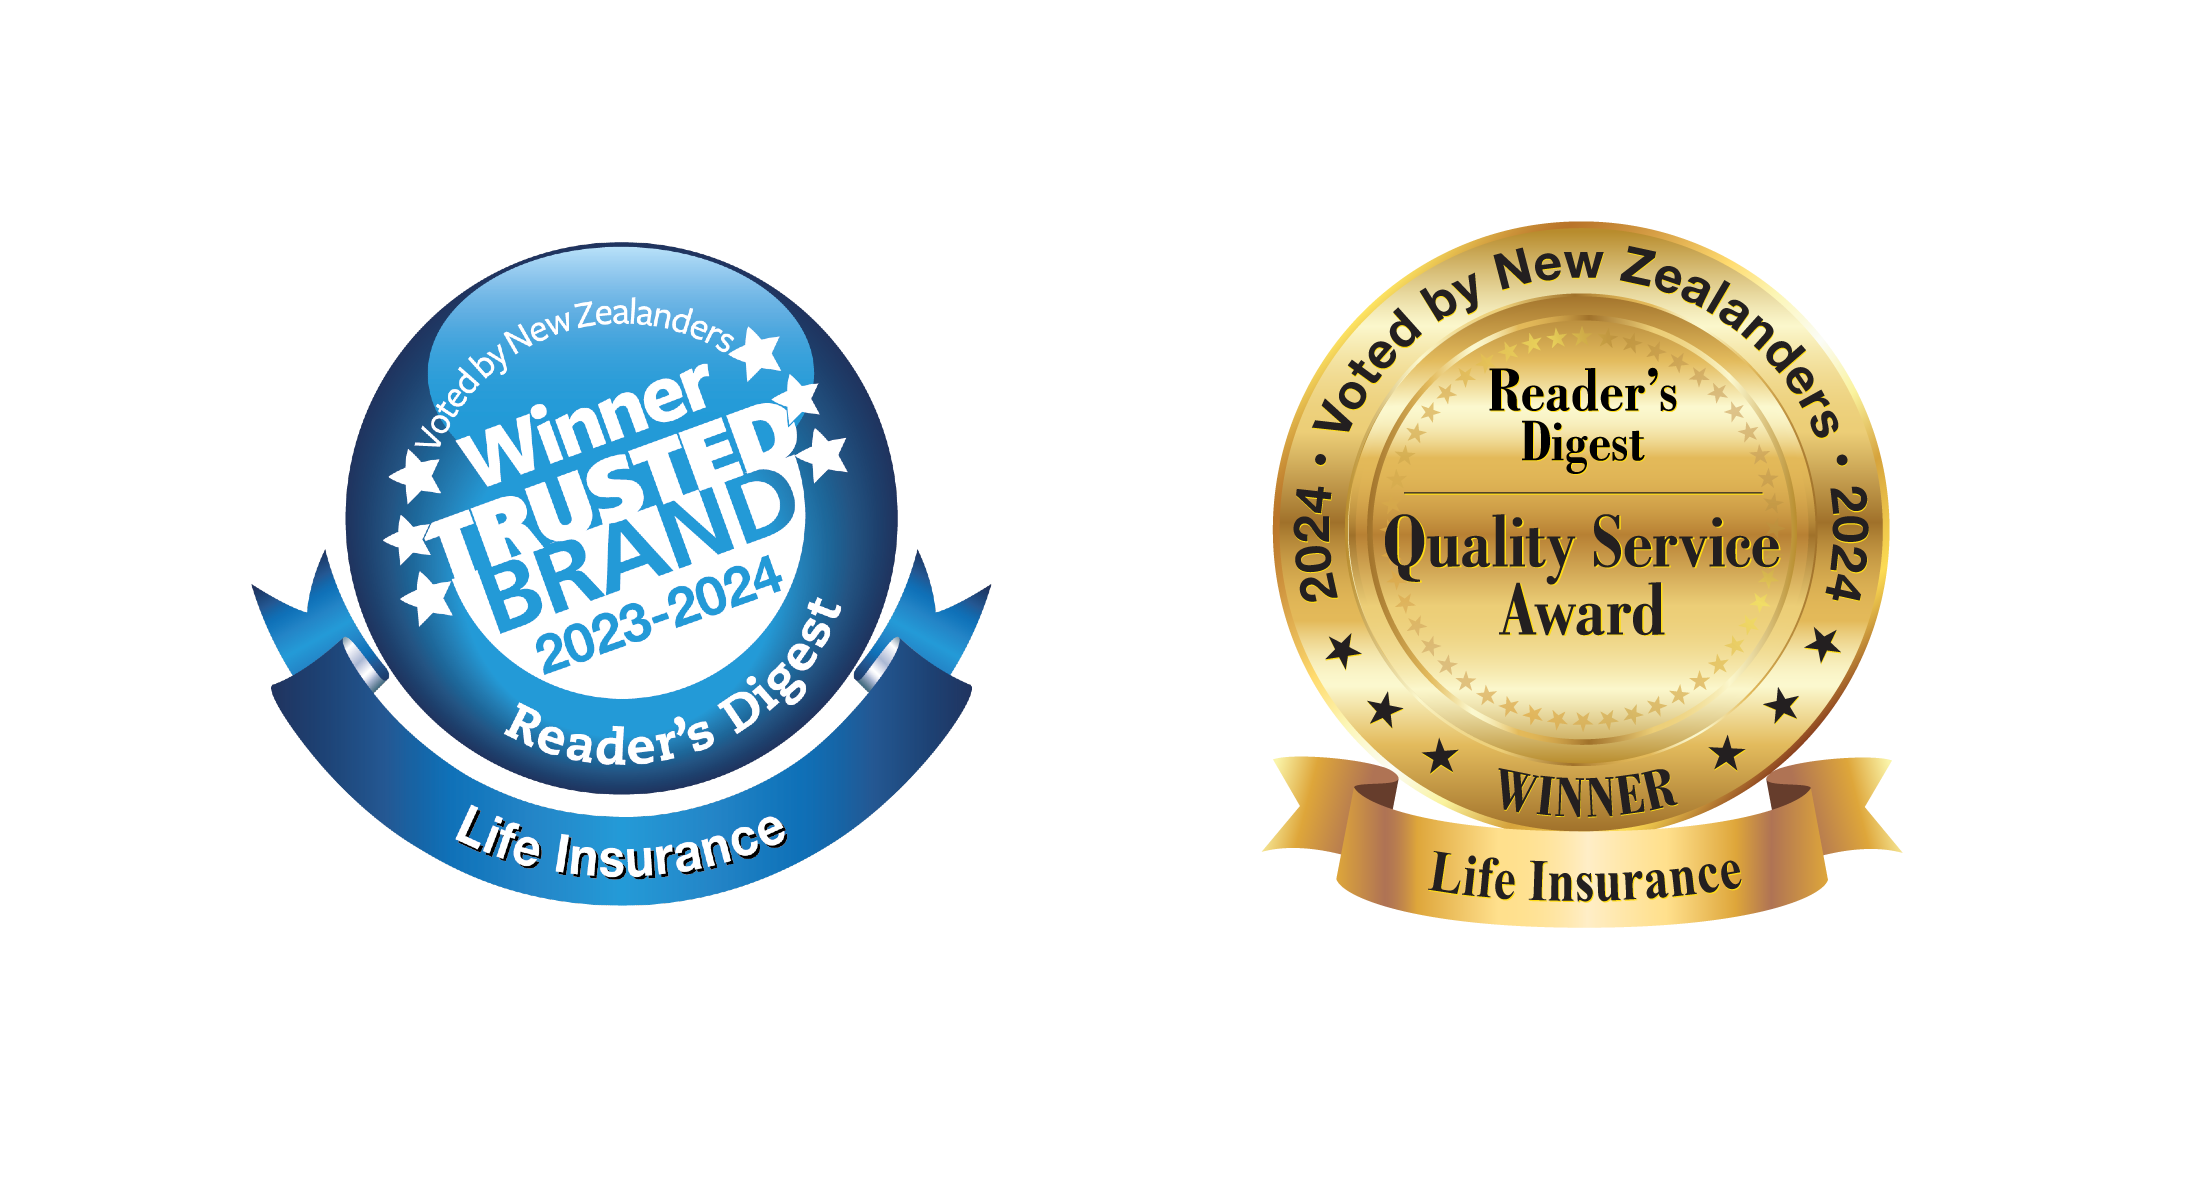 Reader's Digest Winner Trusted Brand and Quality Service Award 2024